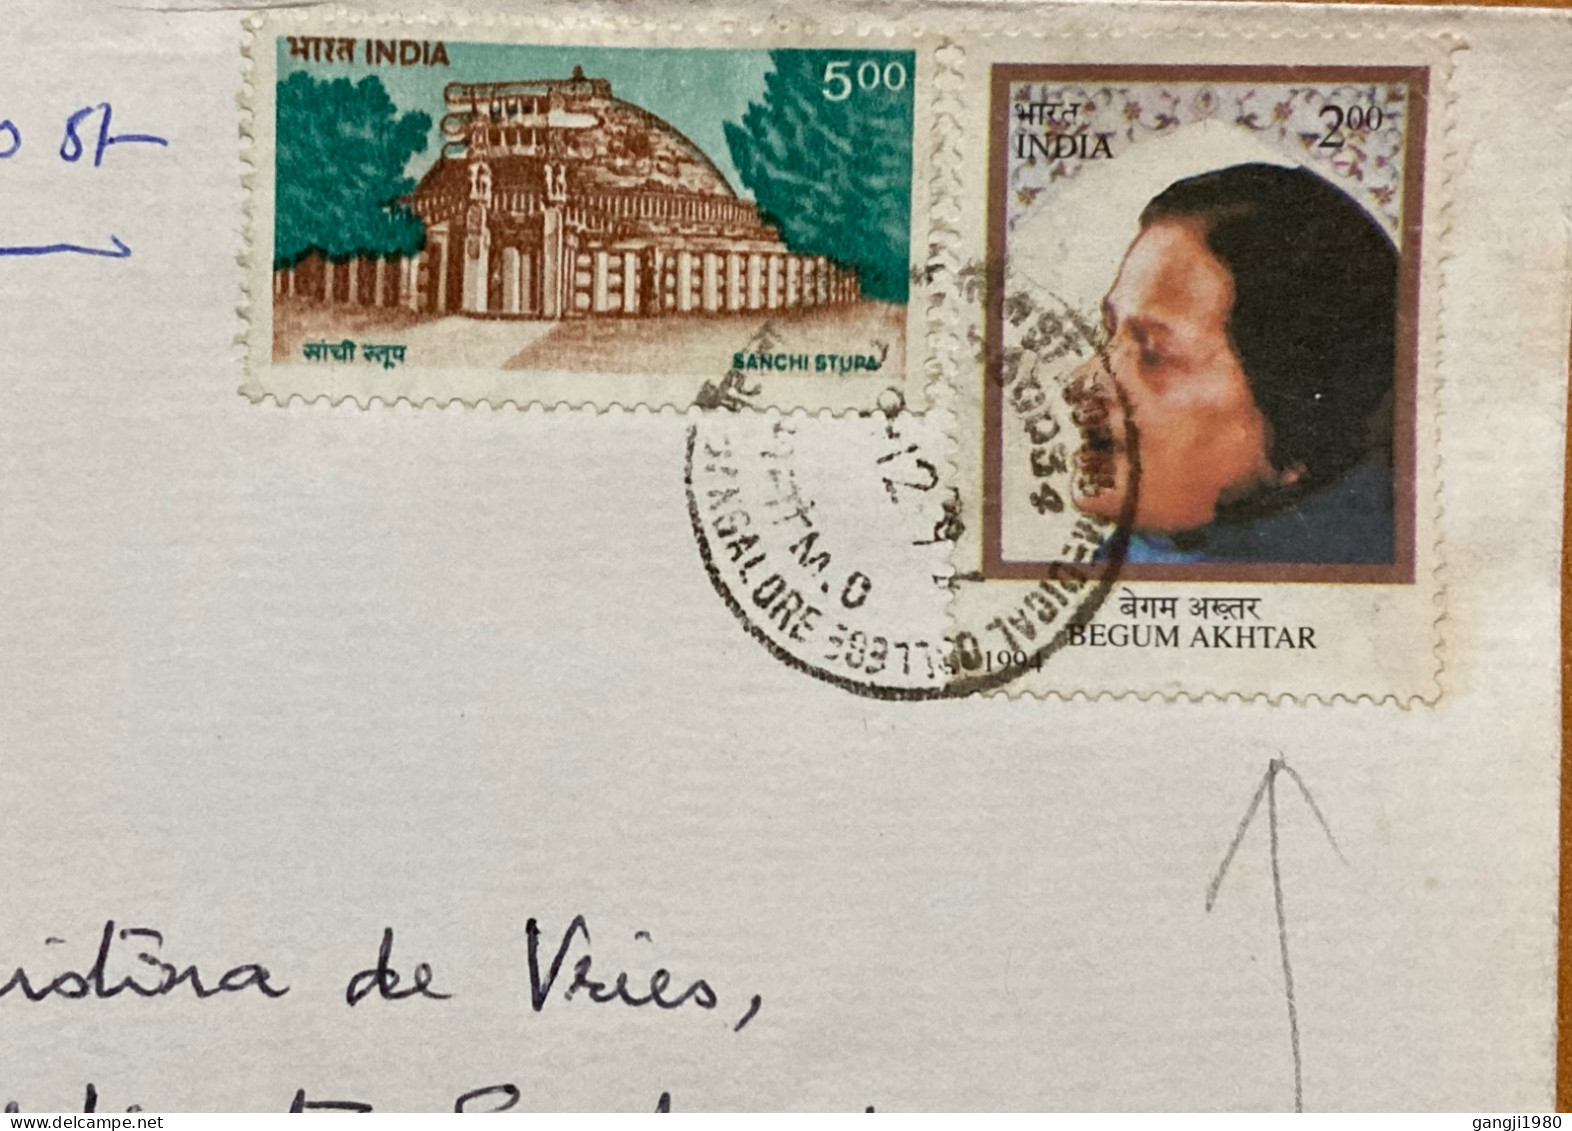 INDIA 1994, COVER USED TO NETHERLANDS, WITHDRAWN STAMP BEGUM AKHTAR, & SANCHI STUPA, RARE USE ON COVER, BANGALORE CITY C - Brieven En Documenten